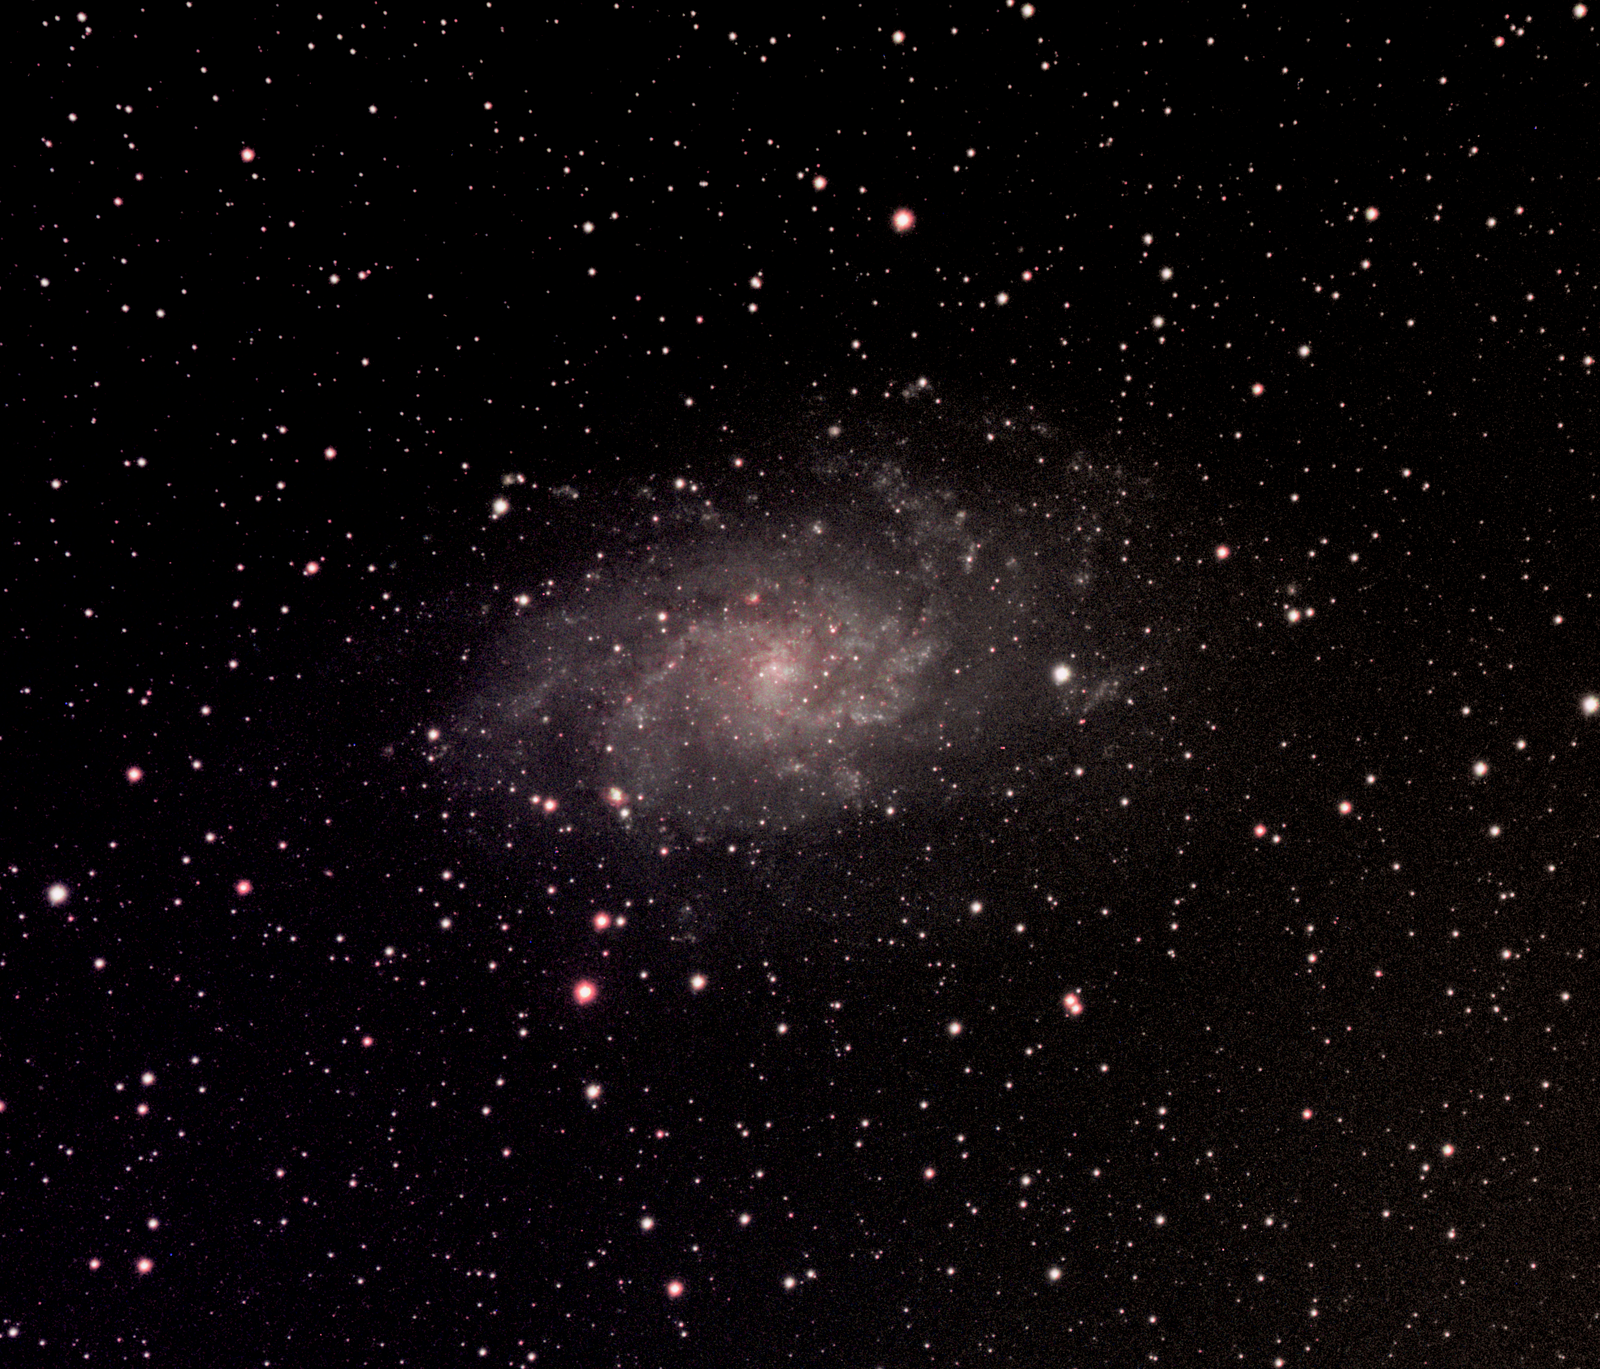 M33 with some color processing in GIMP